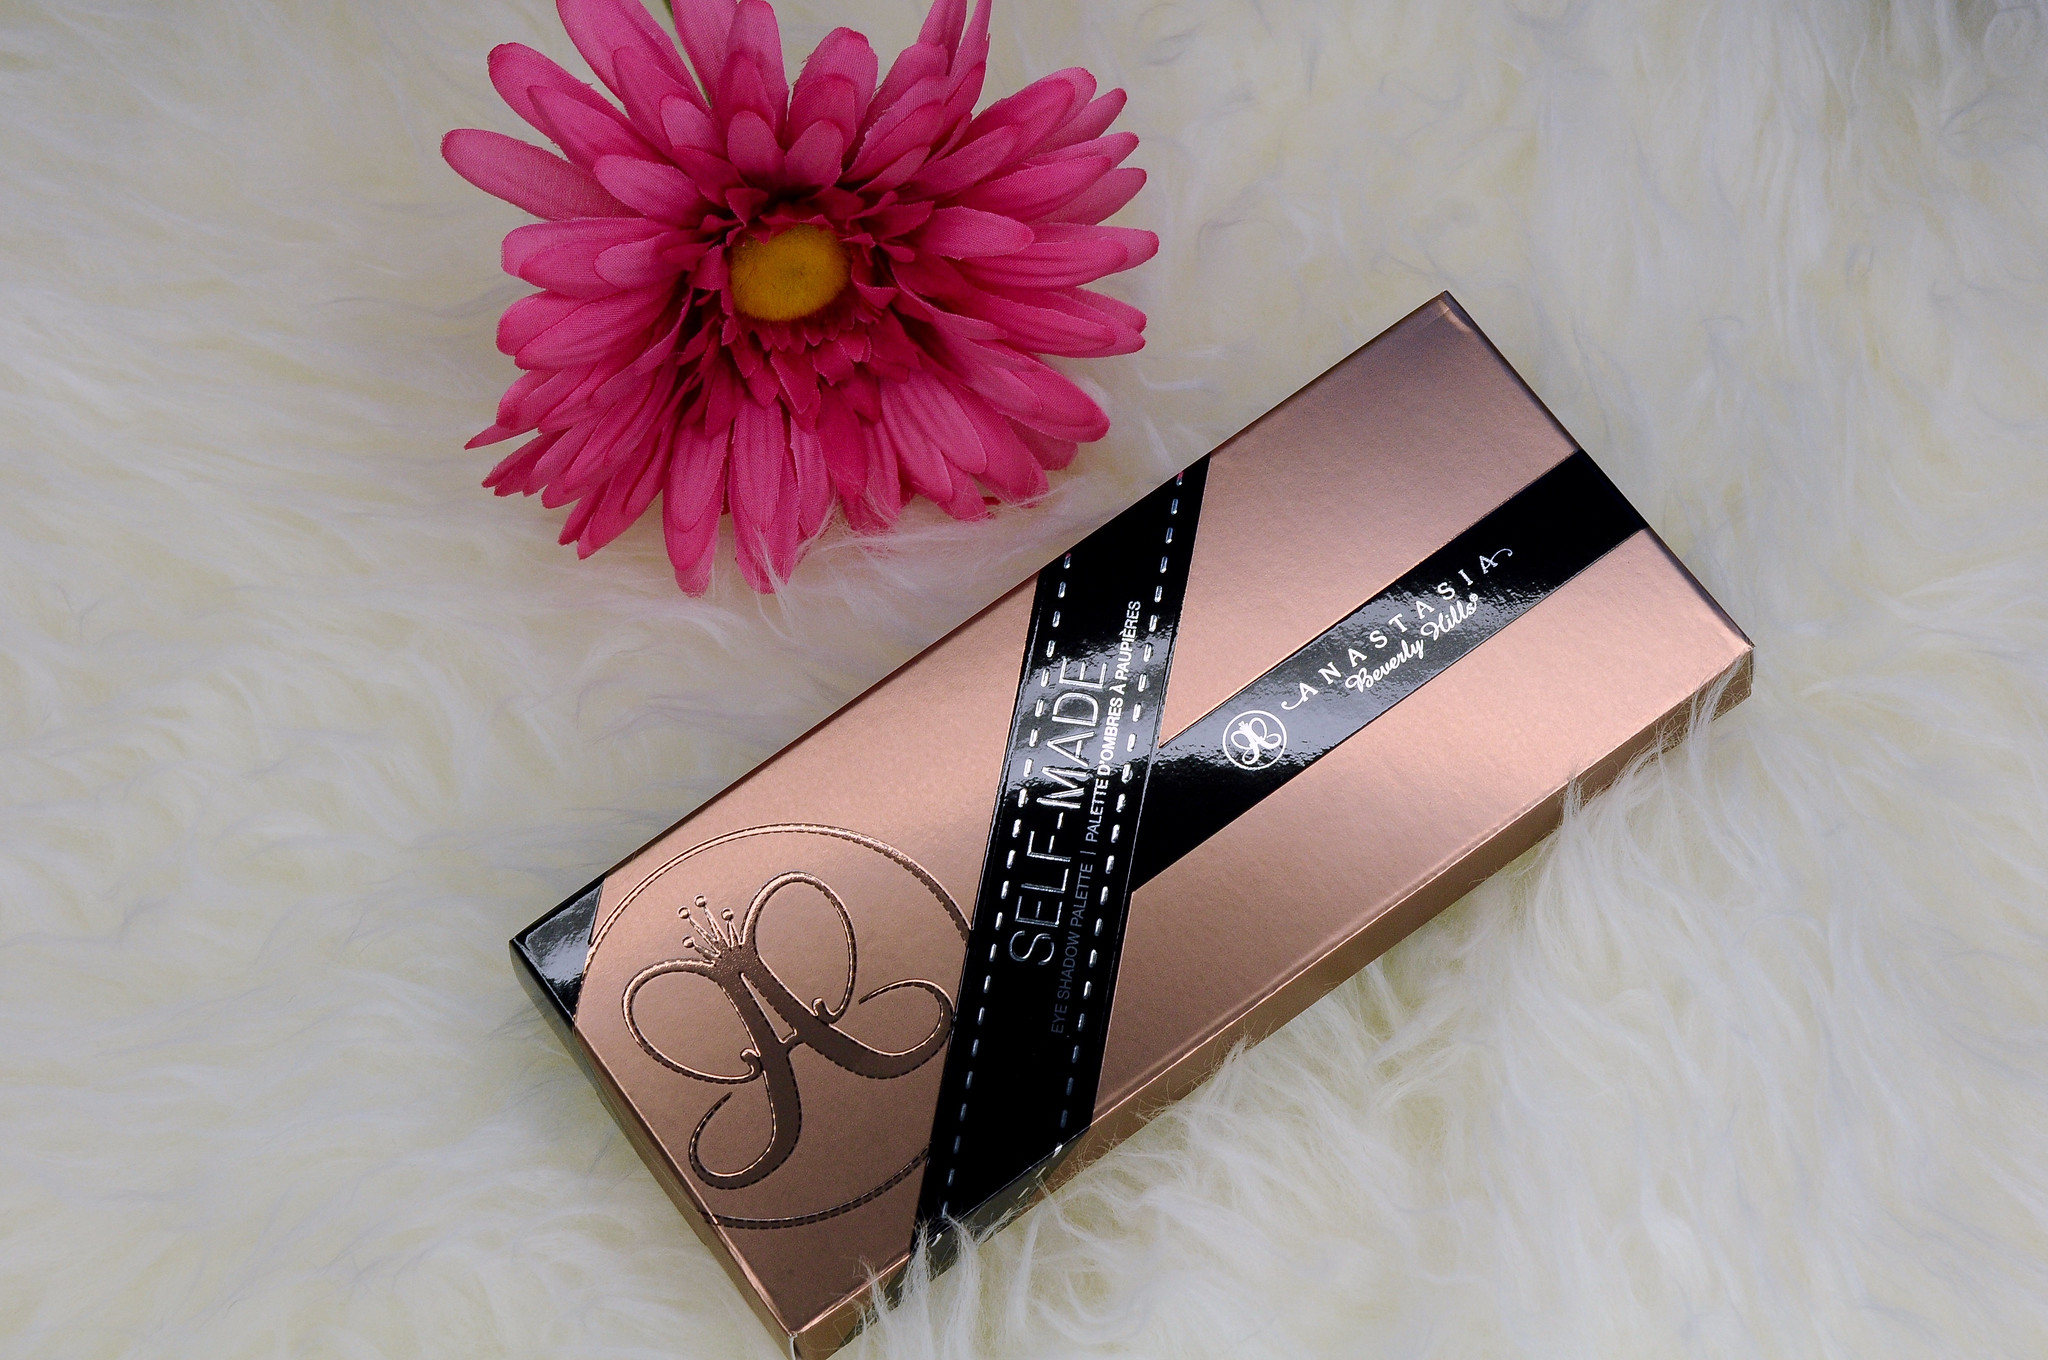 Chanel Travel Palette Limited Edition 2020 Unboxing